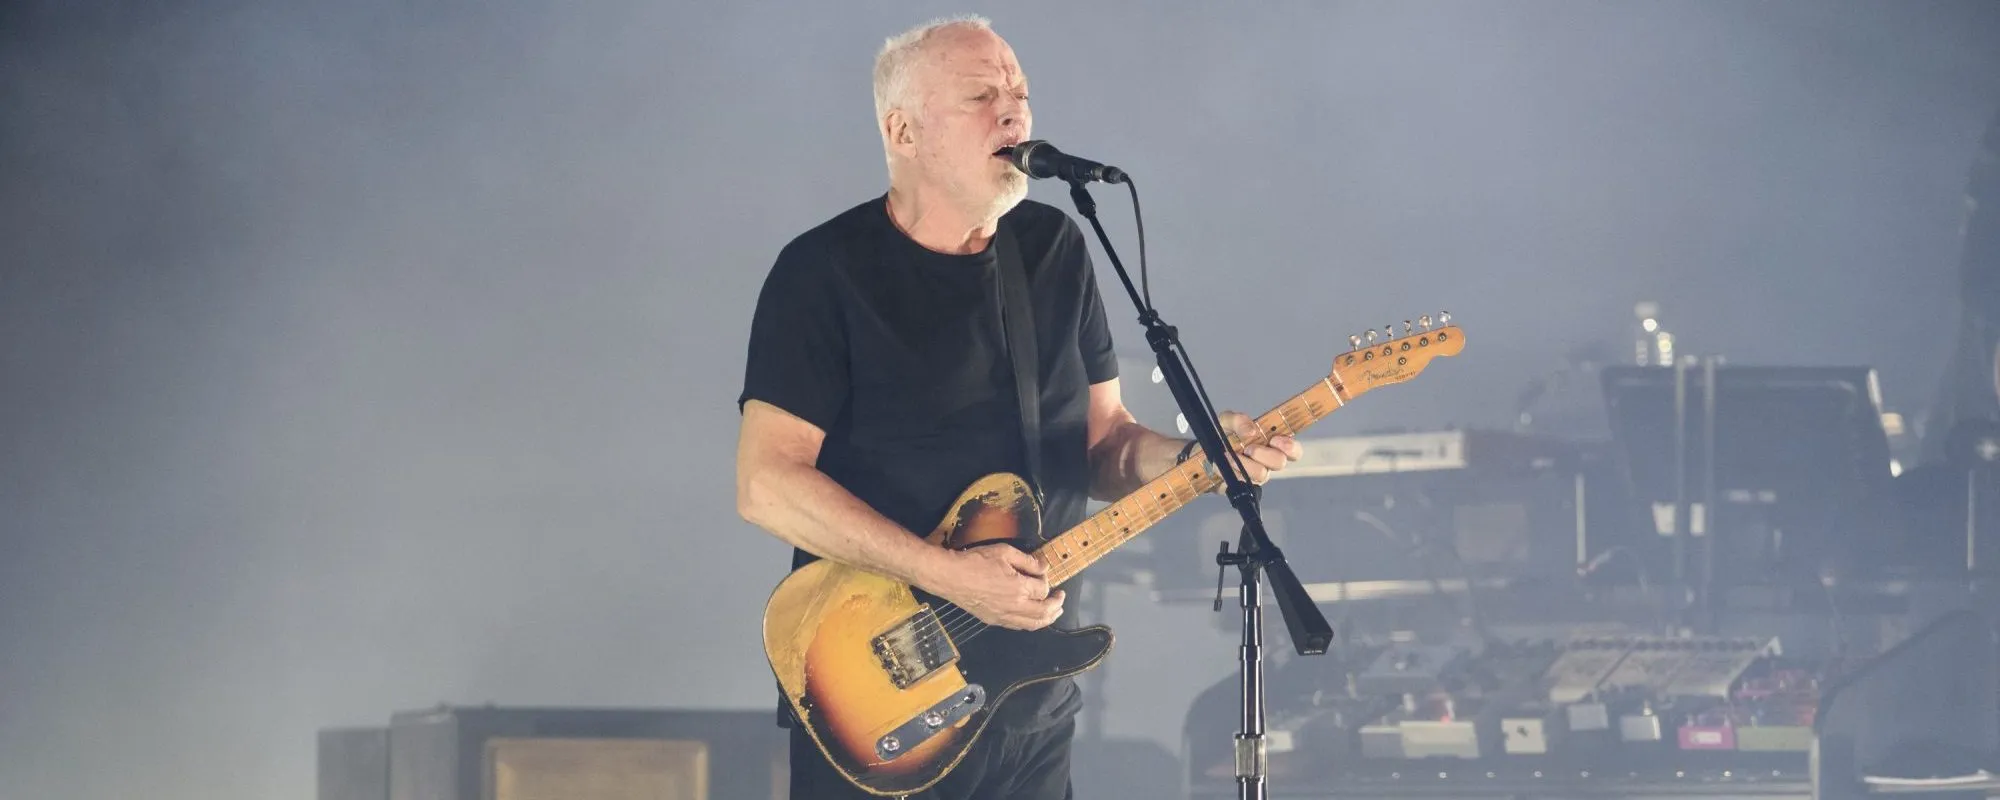 Pink Floyd’s David Gilmour and The Orb Launch Remix Project to Promote ‘Metallic Spheres in Colour’ Album